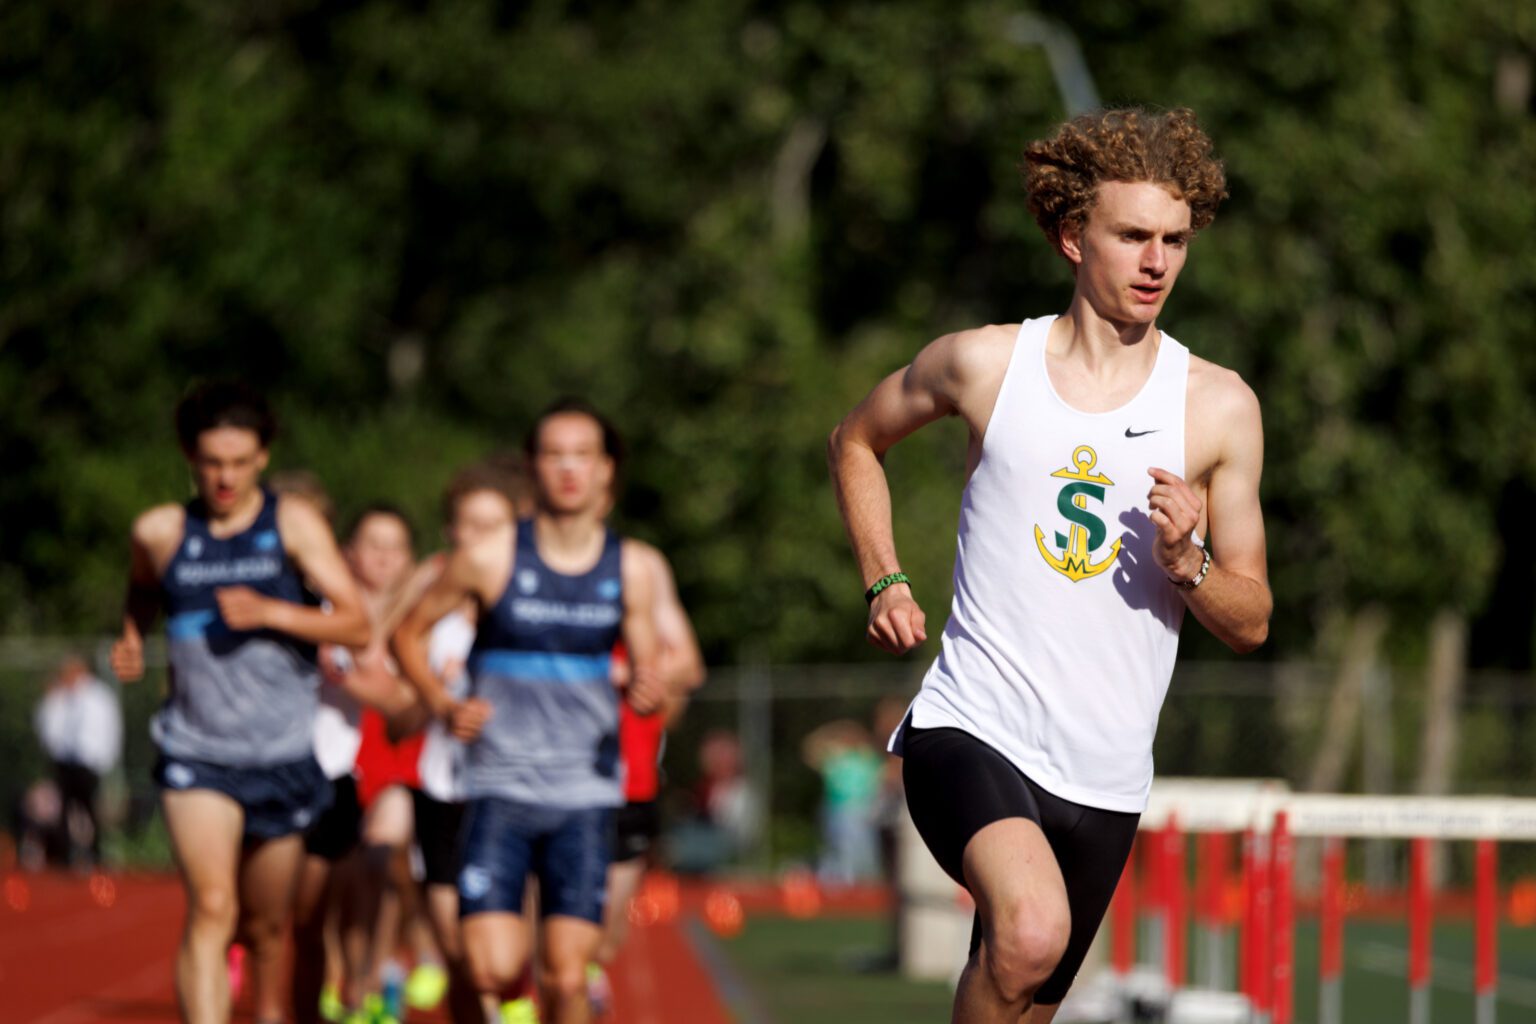 Sehome's Zack Munson finds himself far in front of the pack May 10 during the boys 1